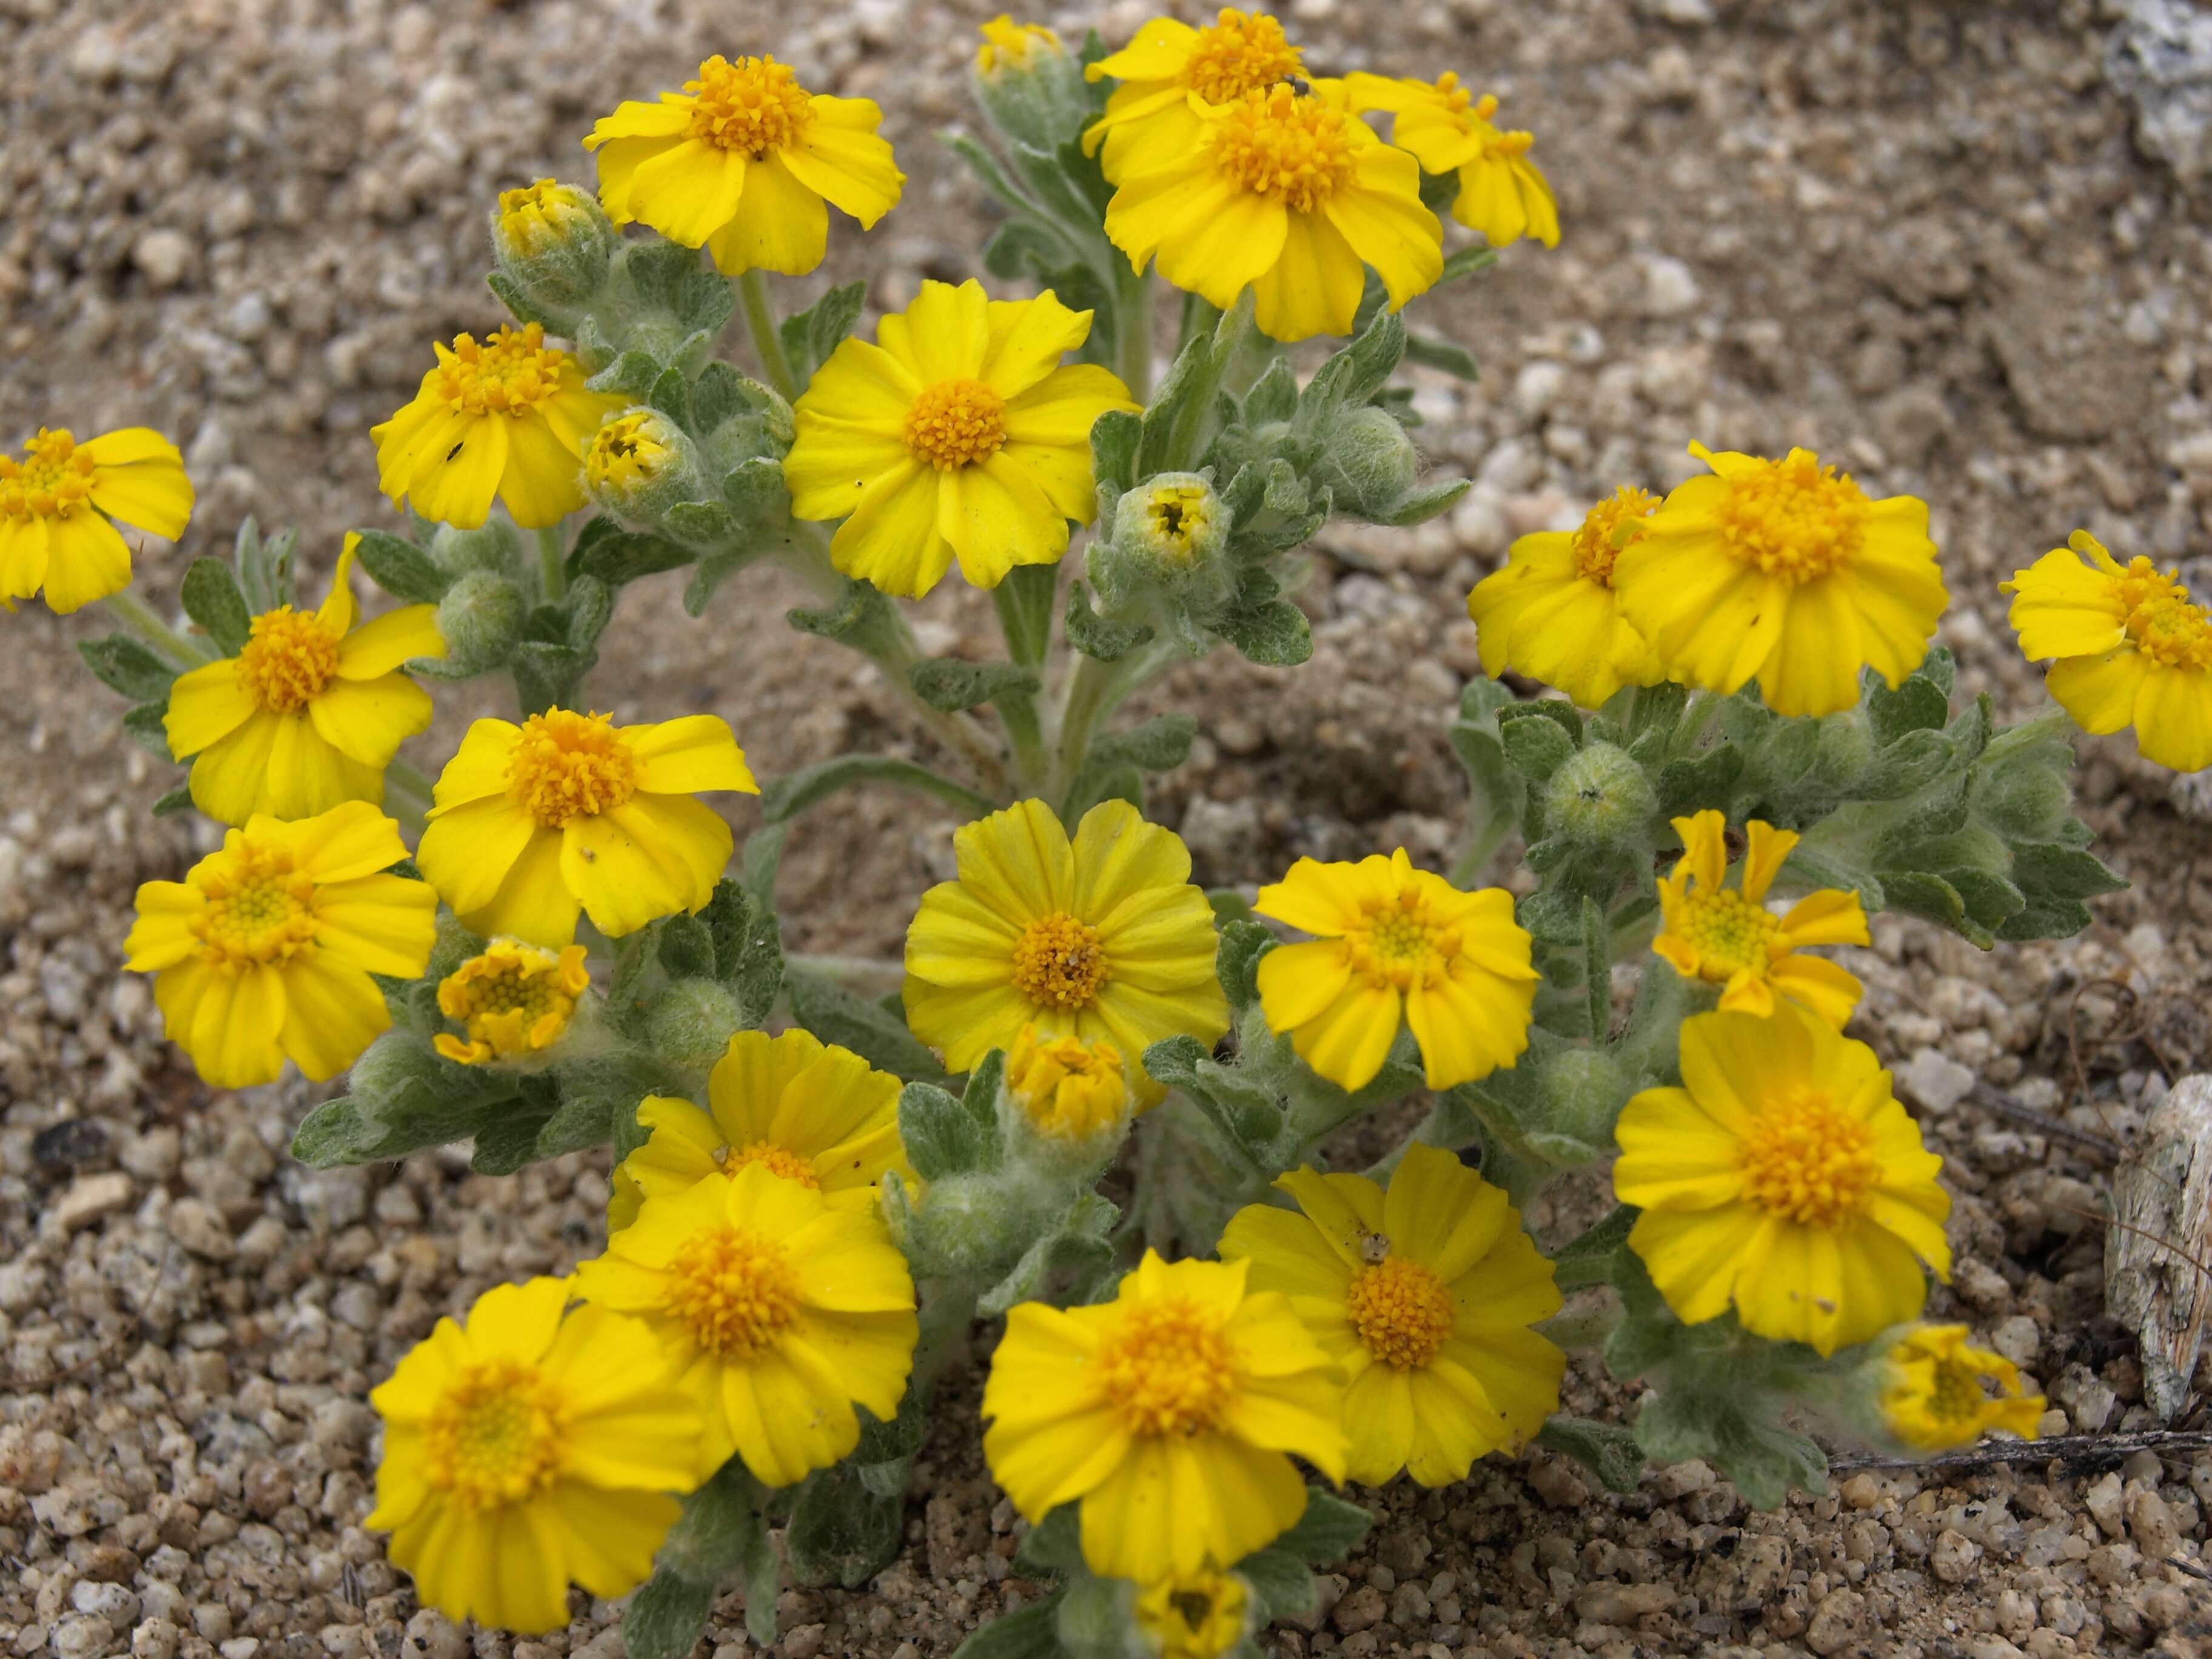 Image of woolly sunflower